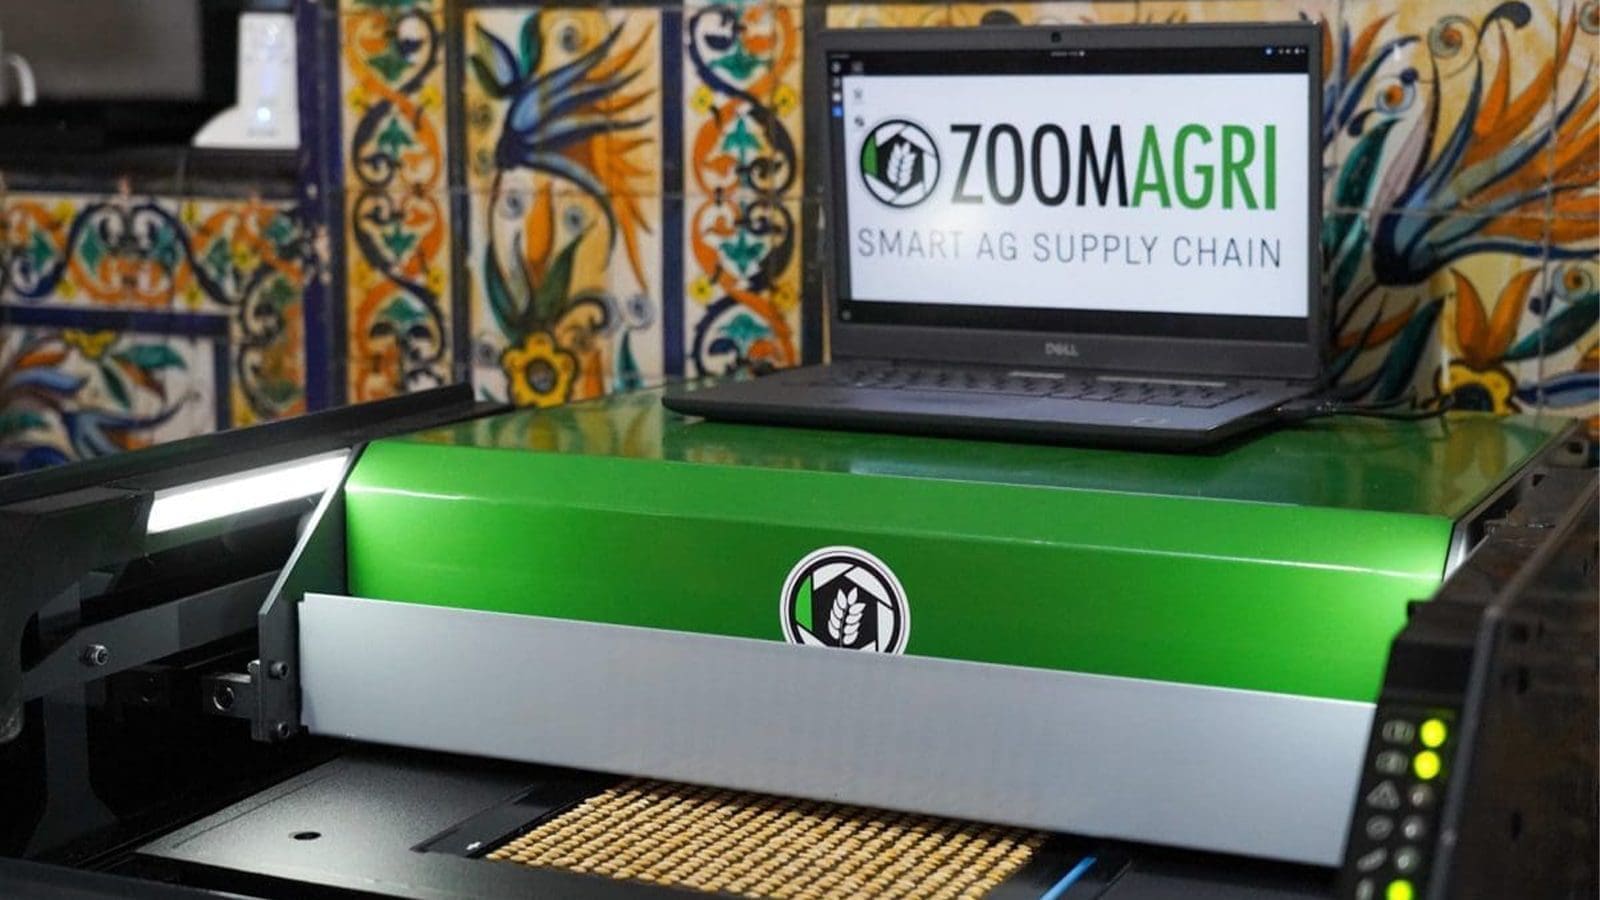 ZoomAgri raises U.S$6 million to revolutionize agricultural traceability with advanced hardware-software system